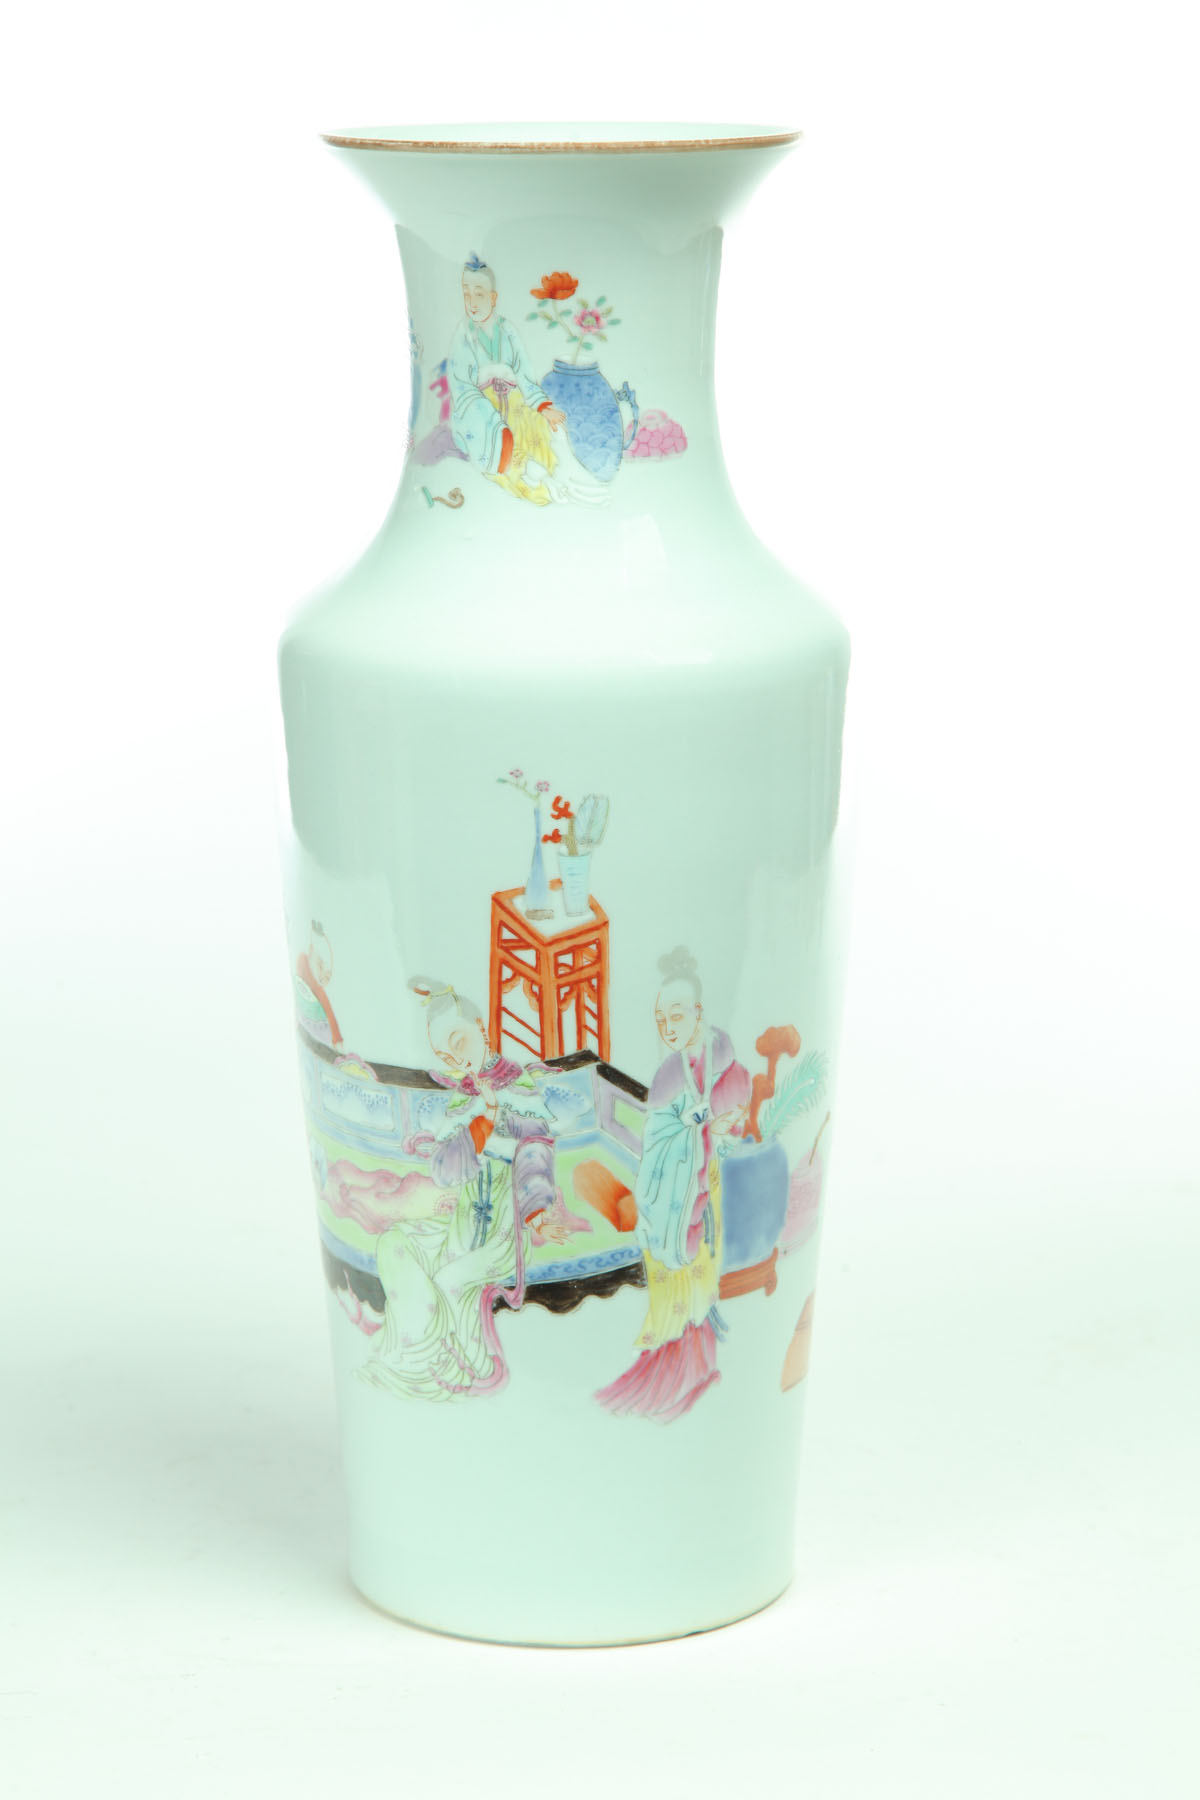 EXPORT-STYLE VASE.  China  20th